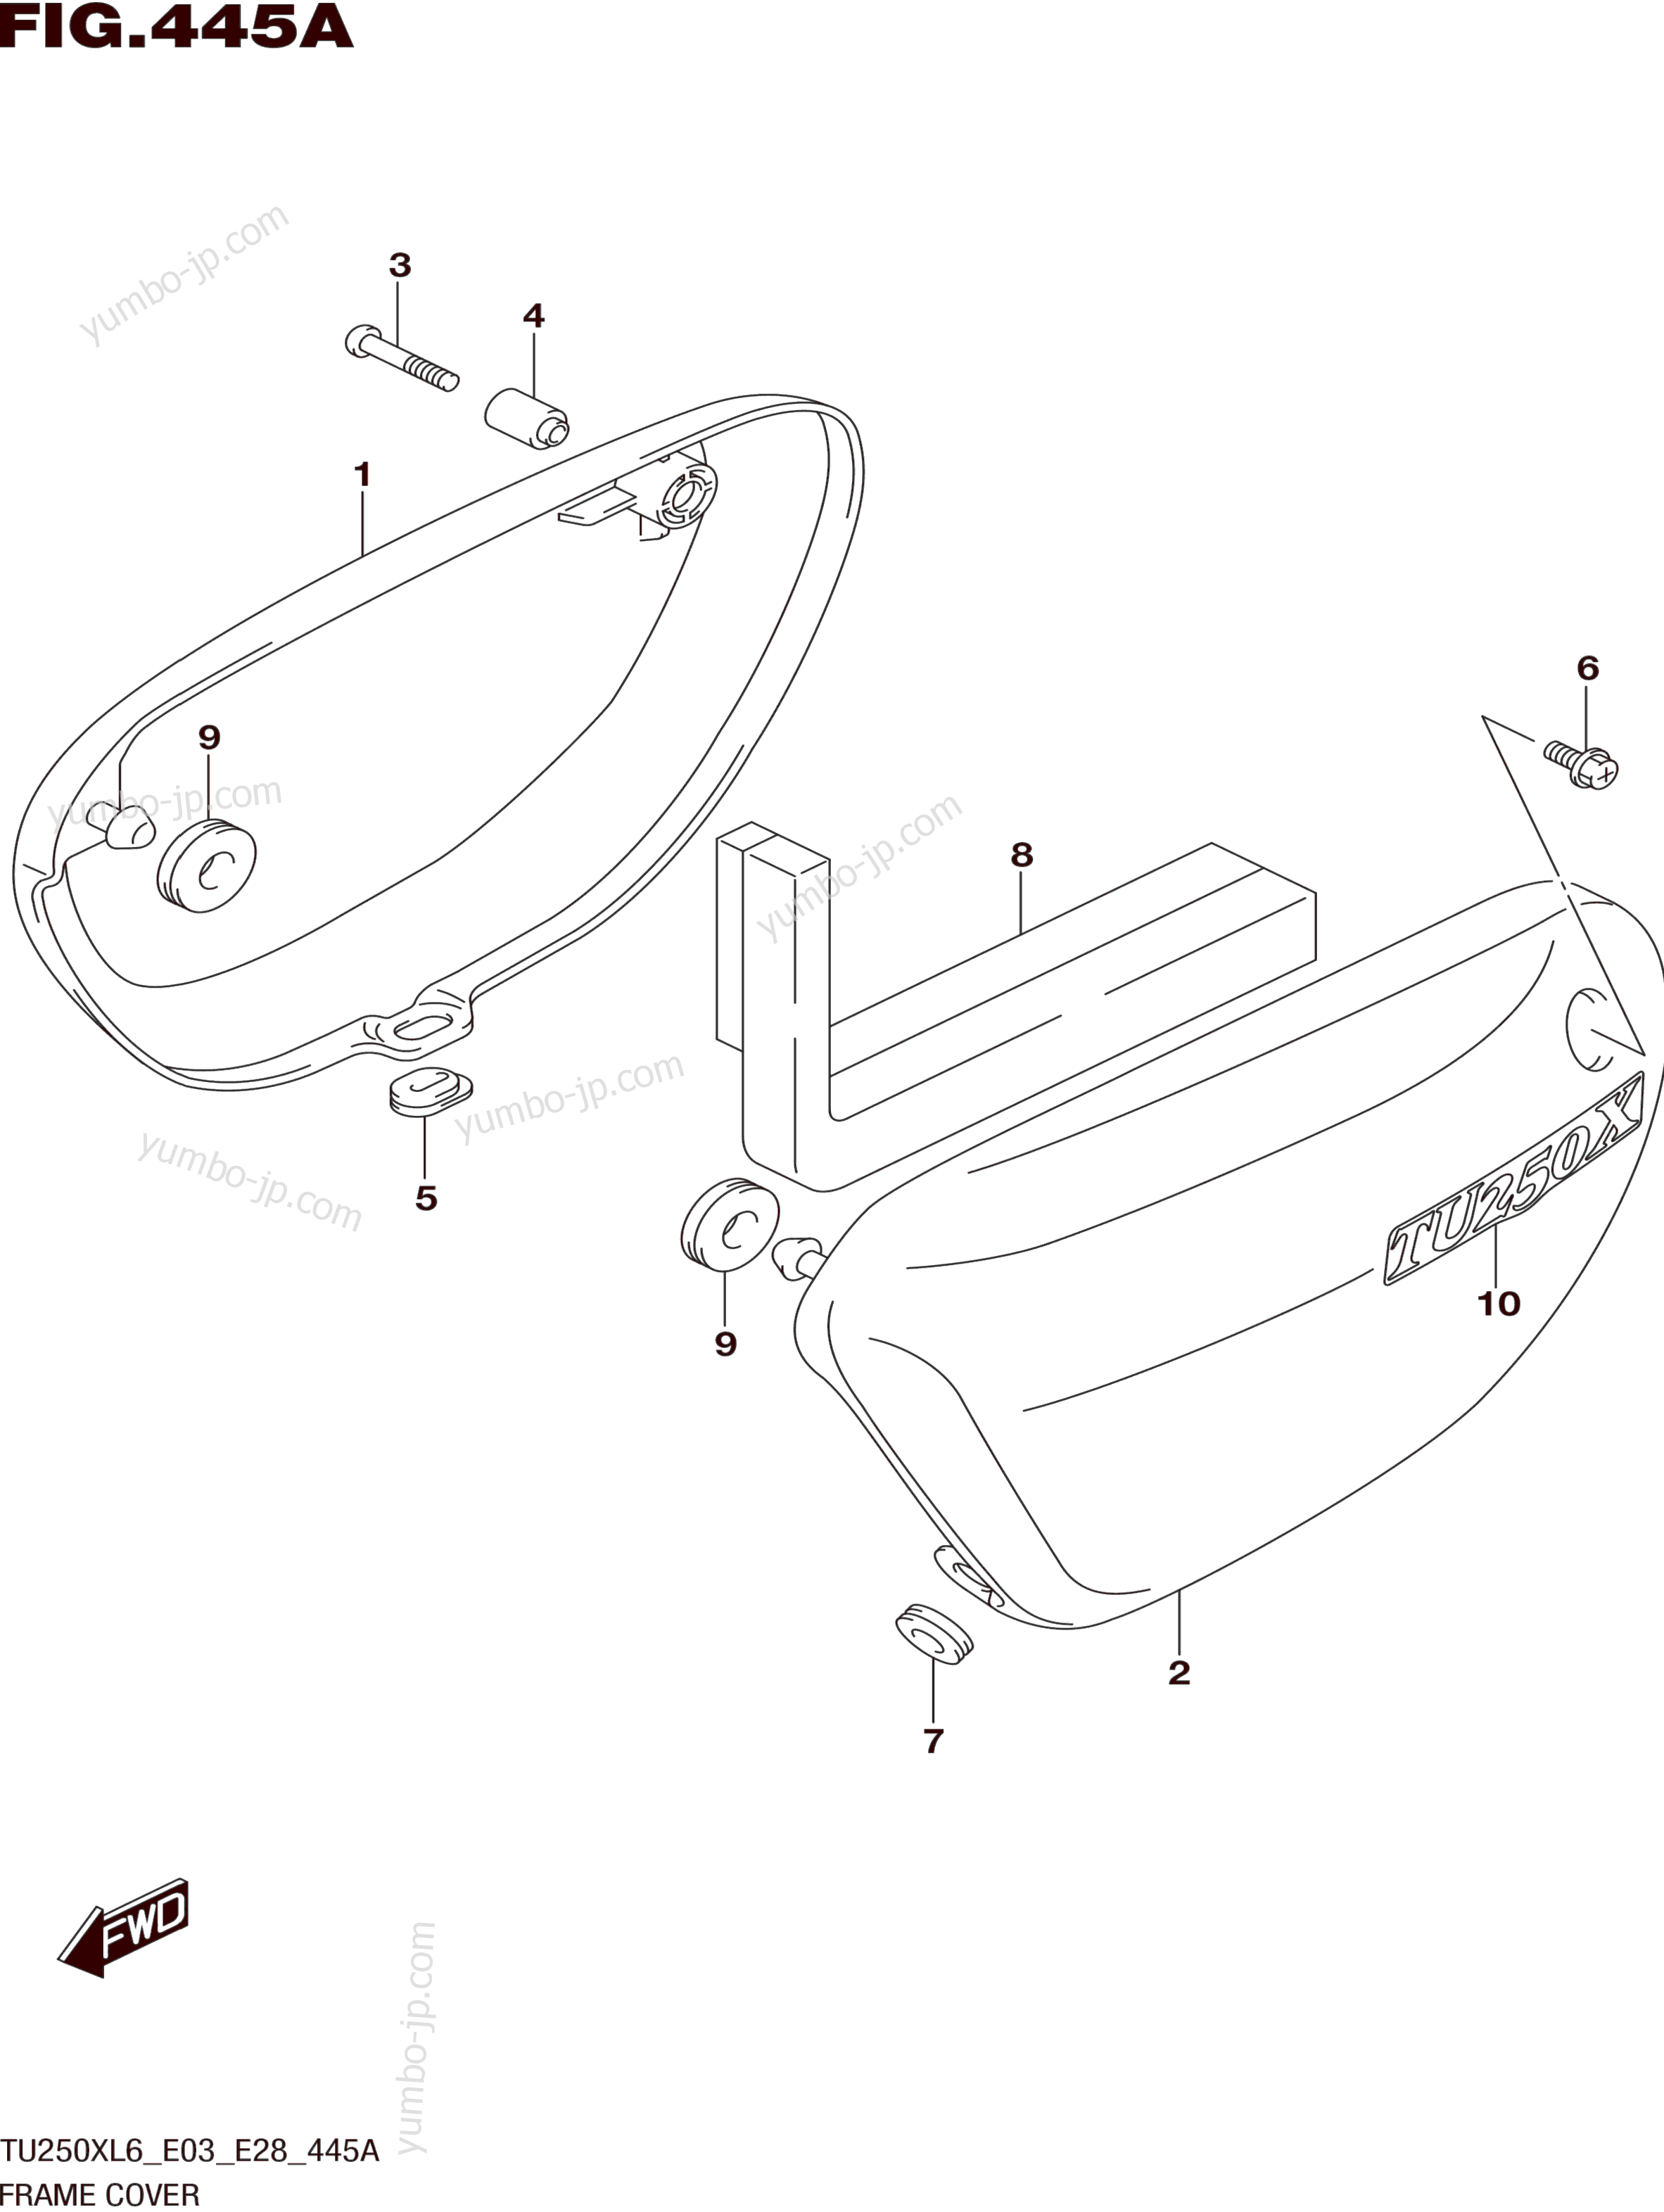 FRAME COVER for motorcycles SUZUKI TU250X 2016 year